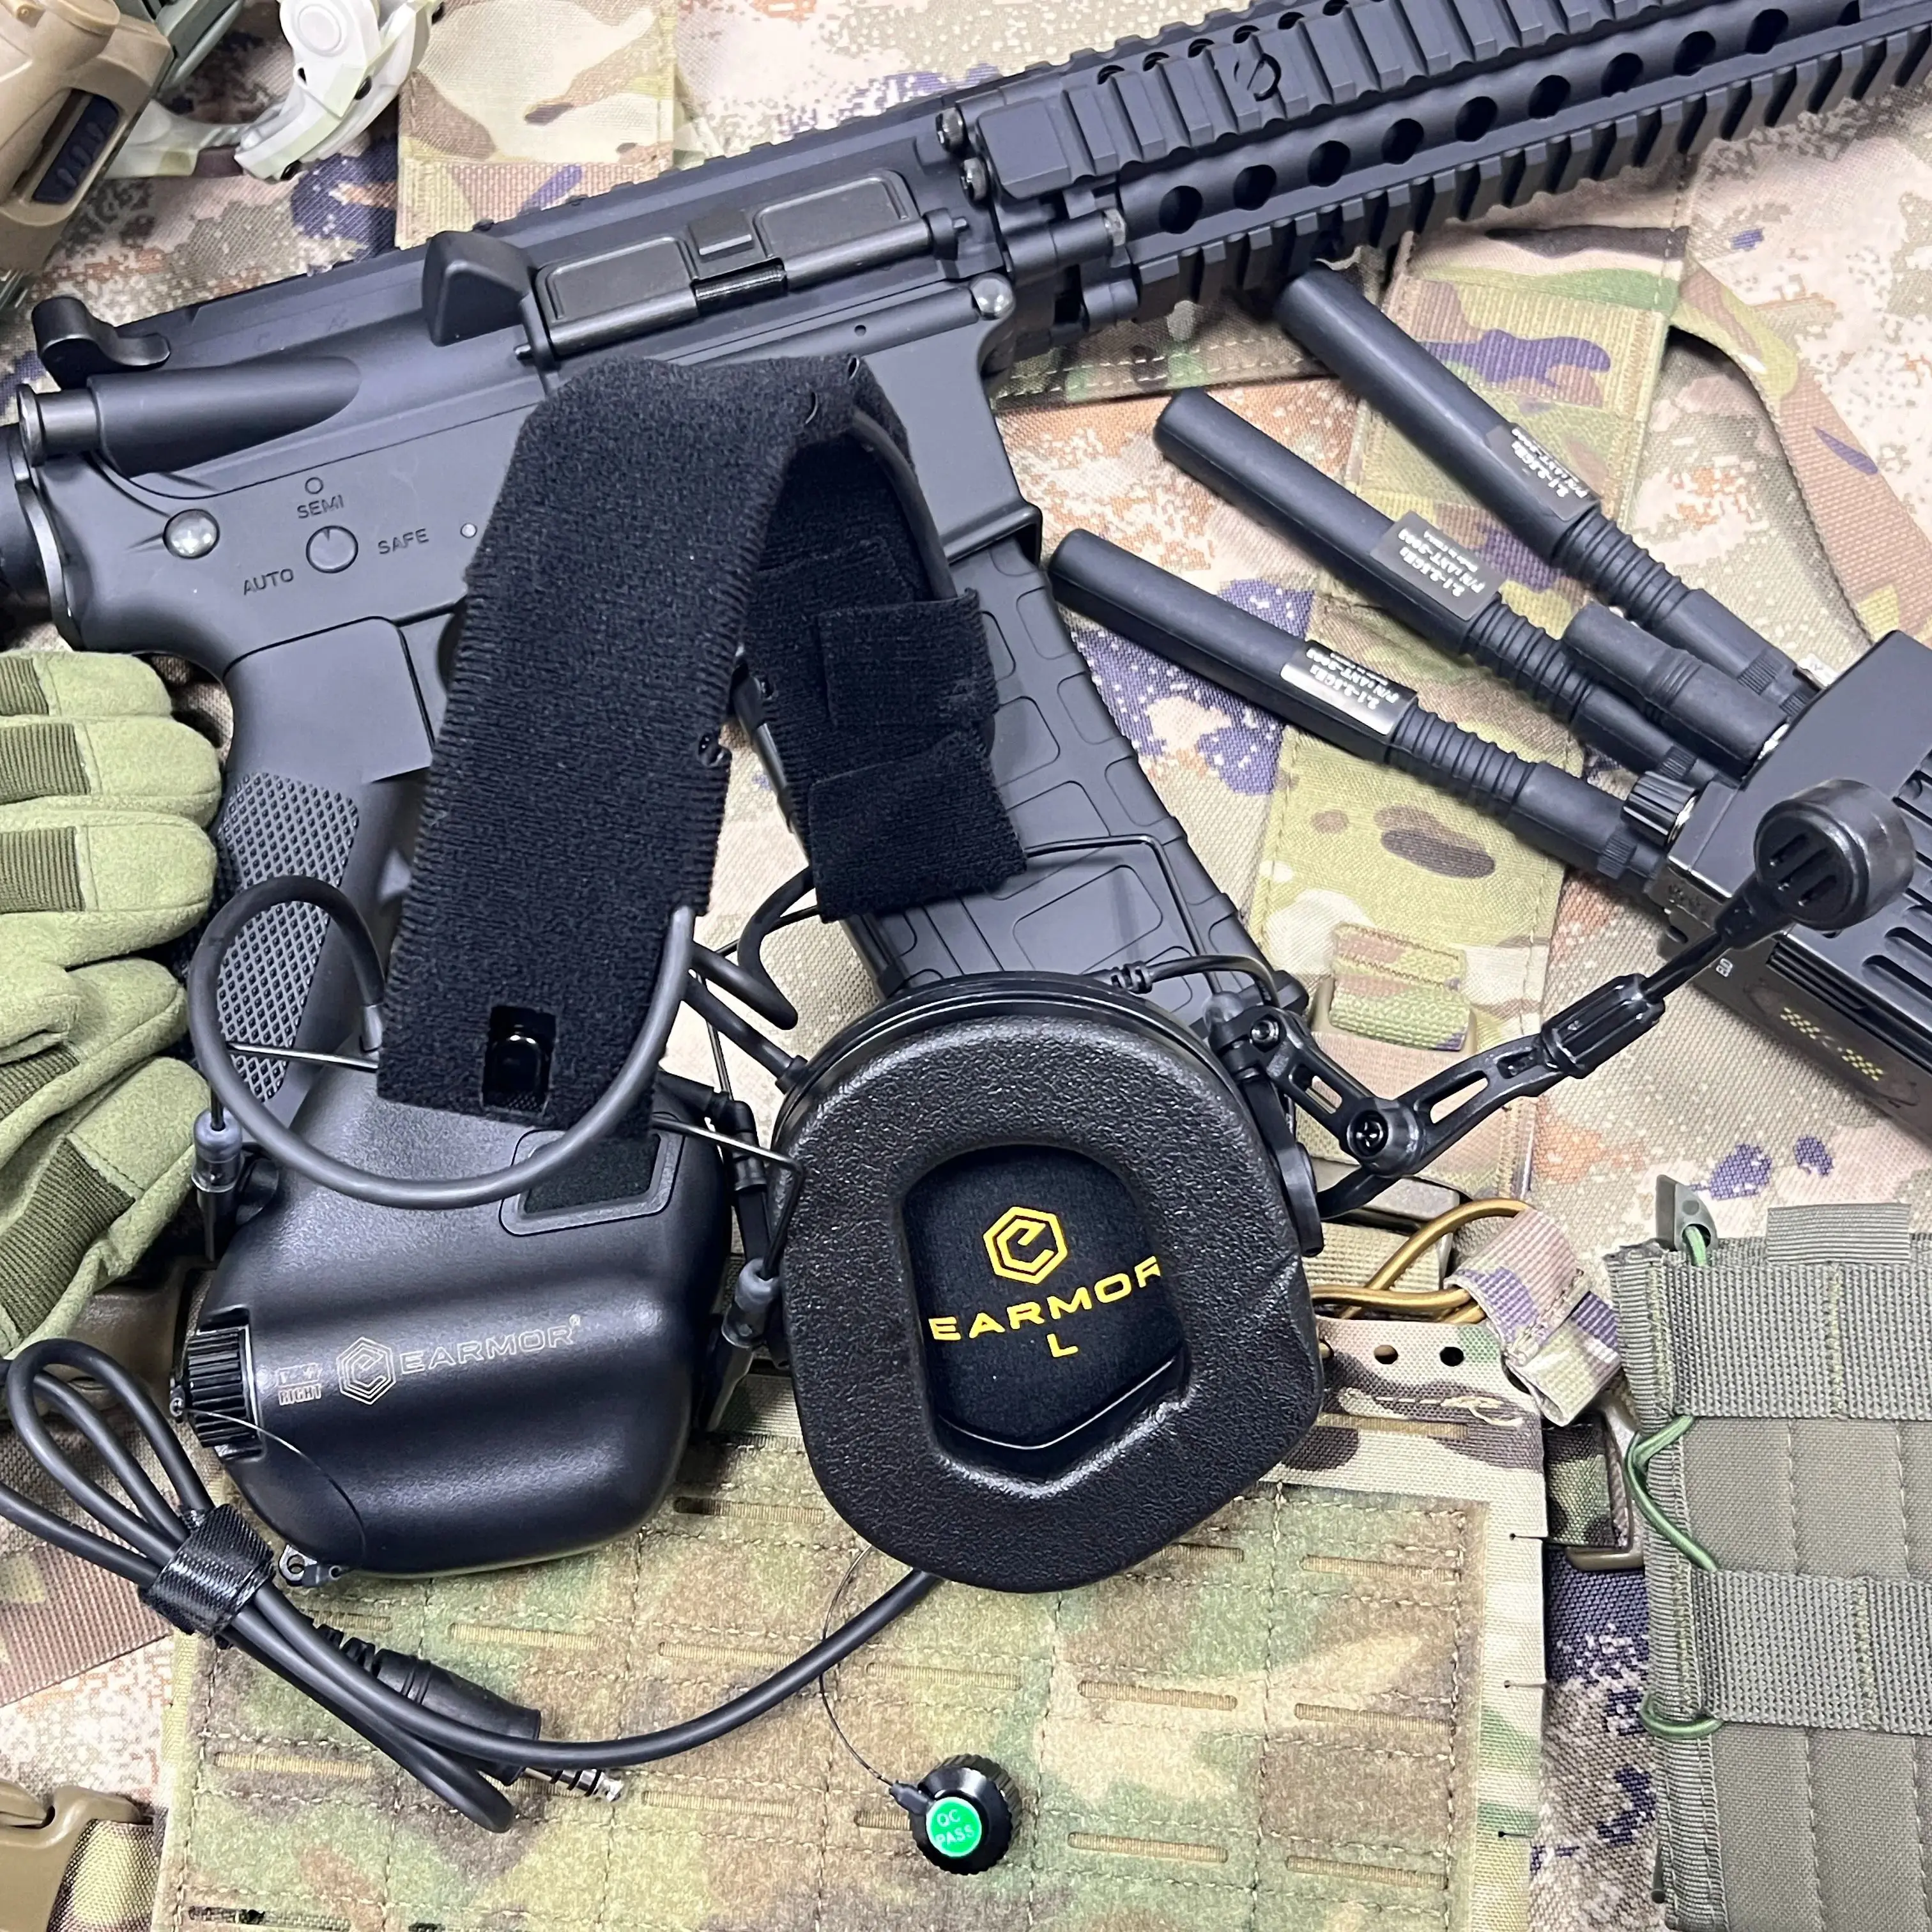 OPSMEN Shooting Tactical Headset M32-Mark3 MilPro Military Standard MIL-STD-416 Electronic Communications Hearing Protector